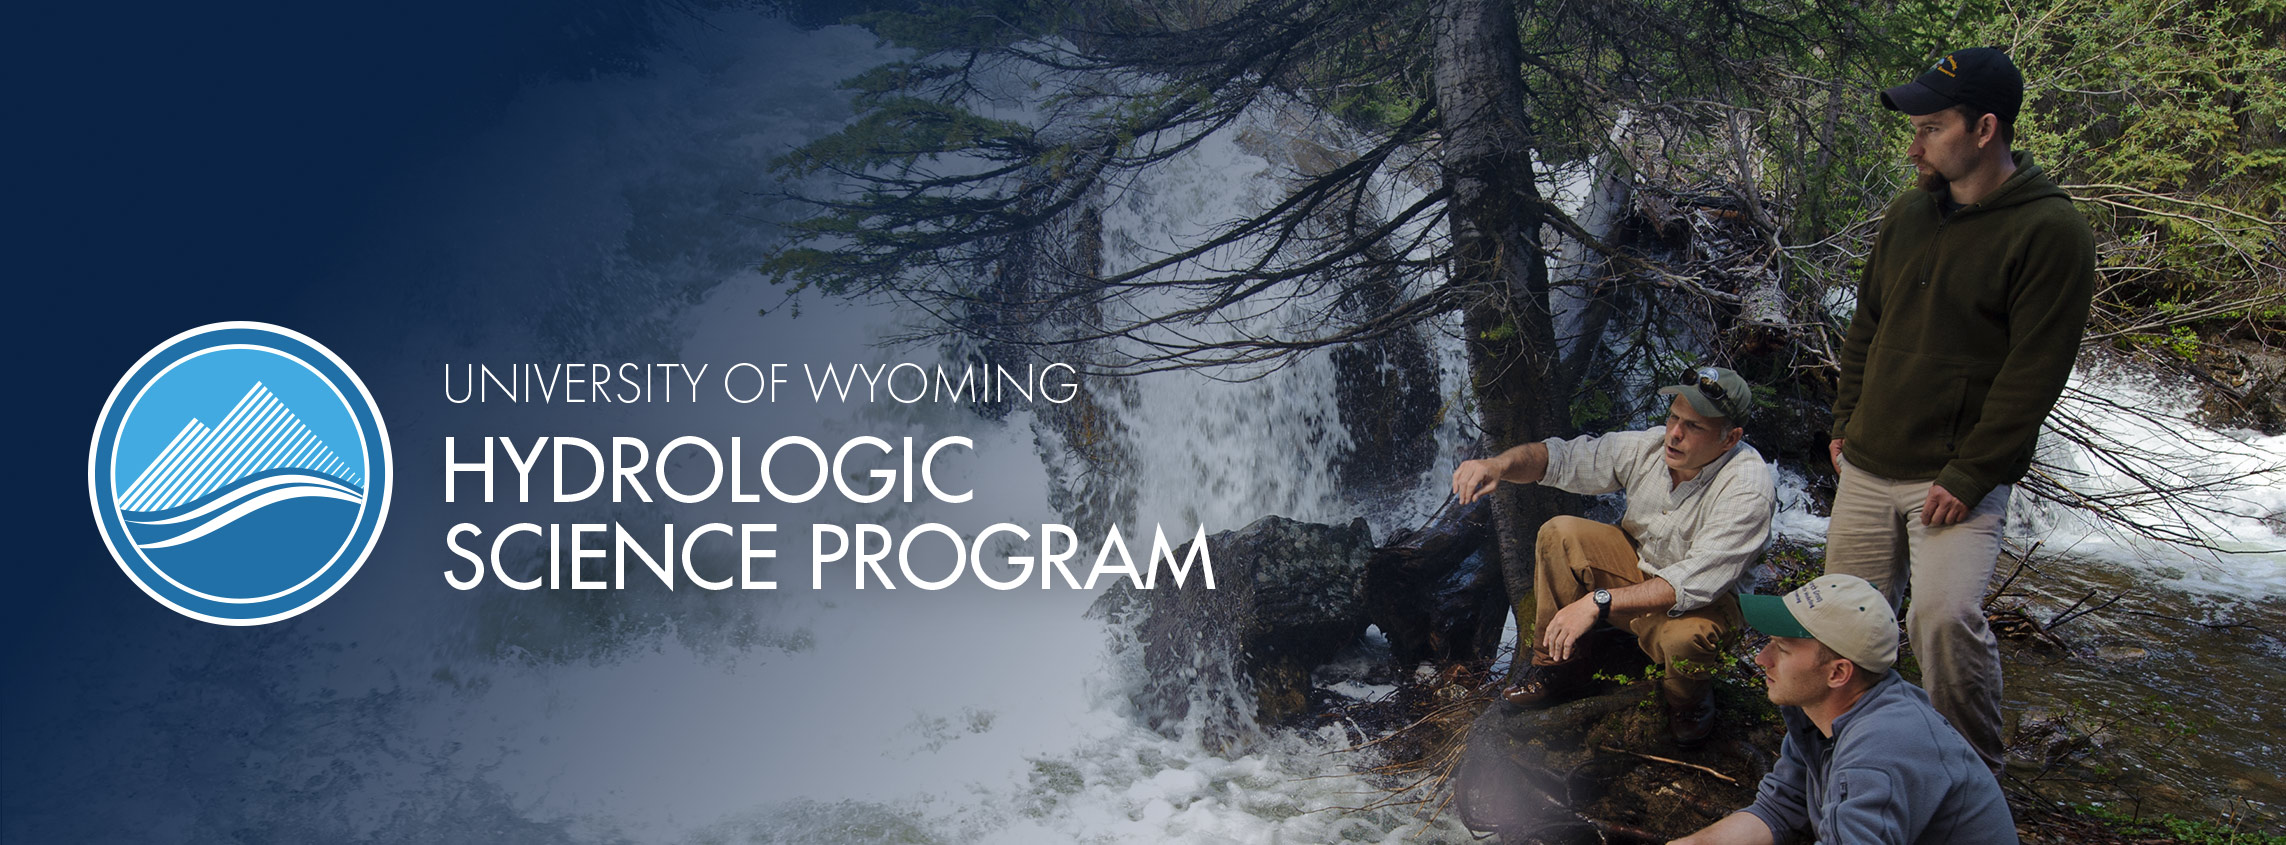 University of Wyoming Hydrologic Science Program logo over researchers by river